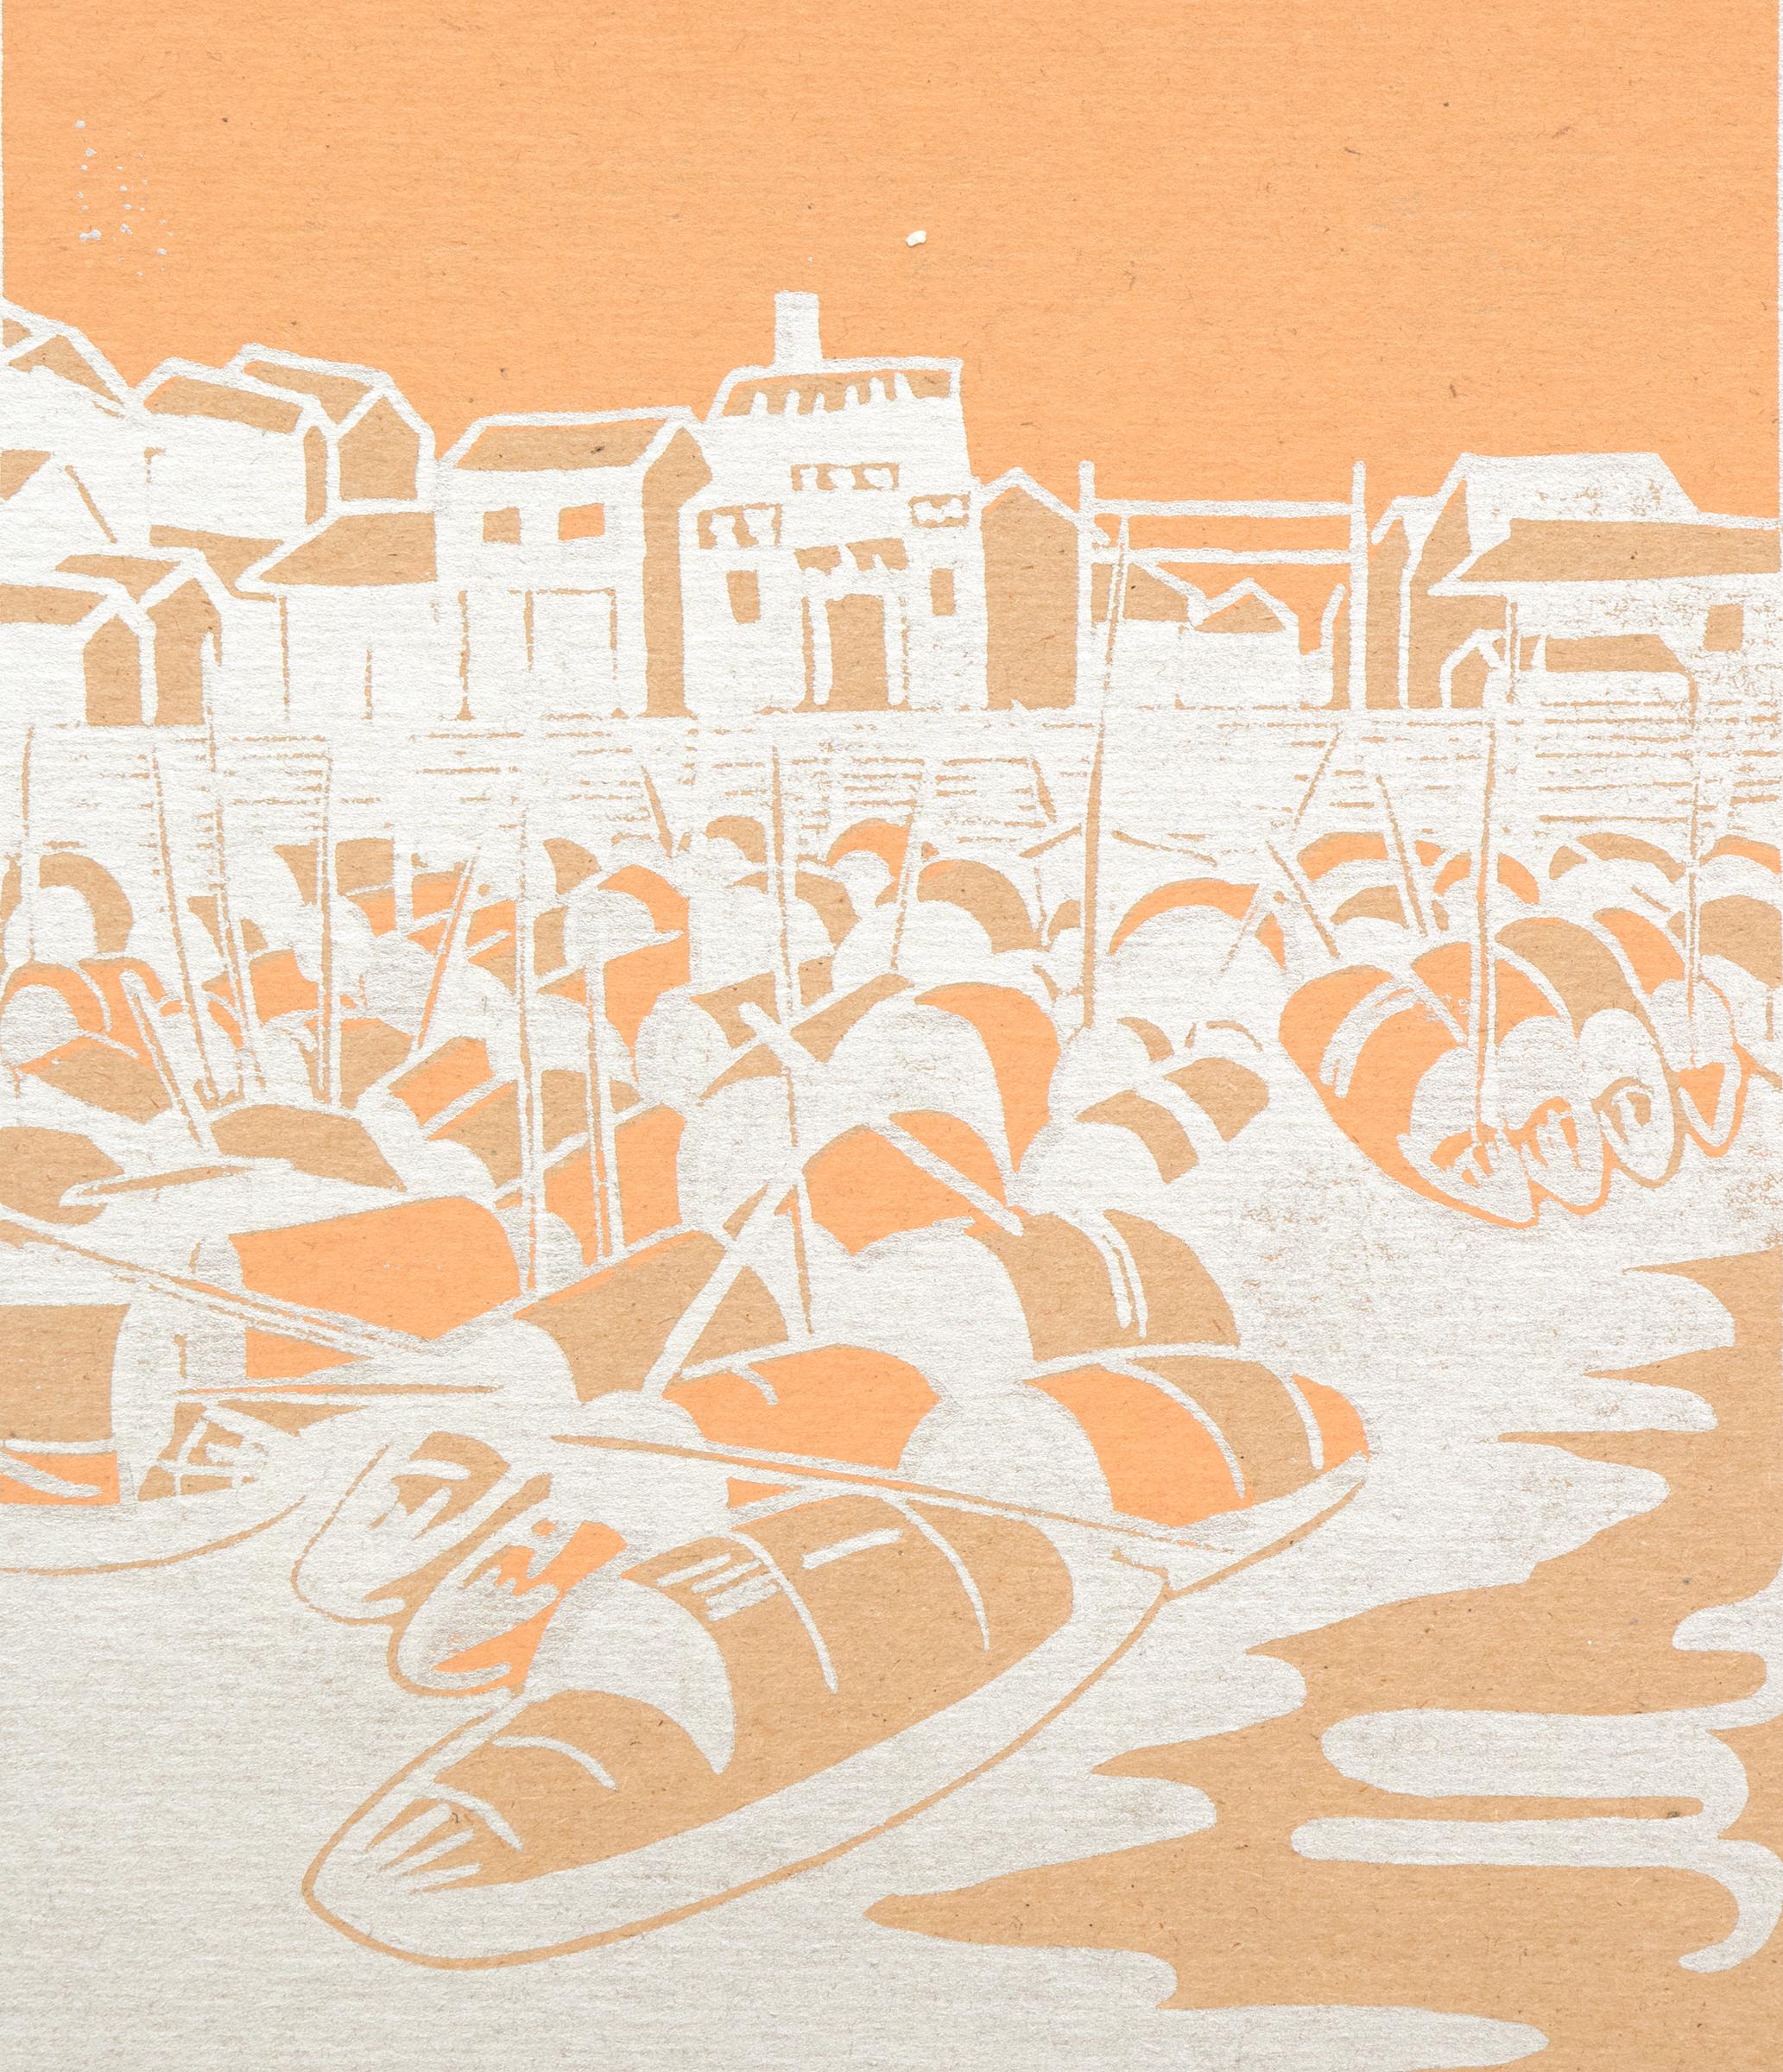 Sampans-Side by Side, Canton, Vintage 1920s Woodcut, Boats in Guangdong, China - Print by Eve Drewelowe